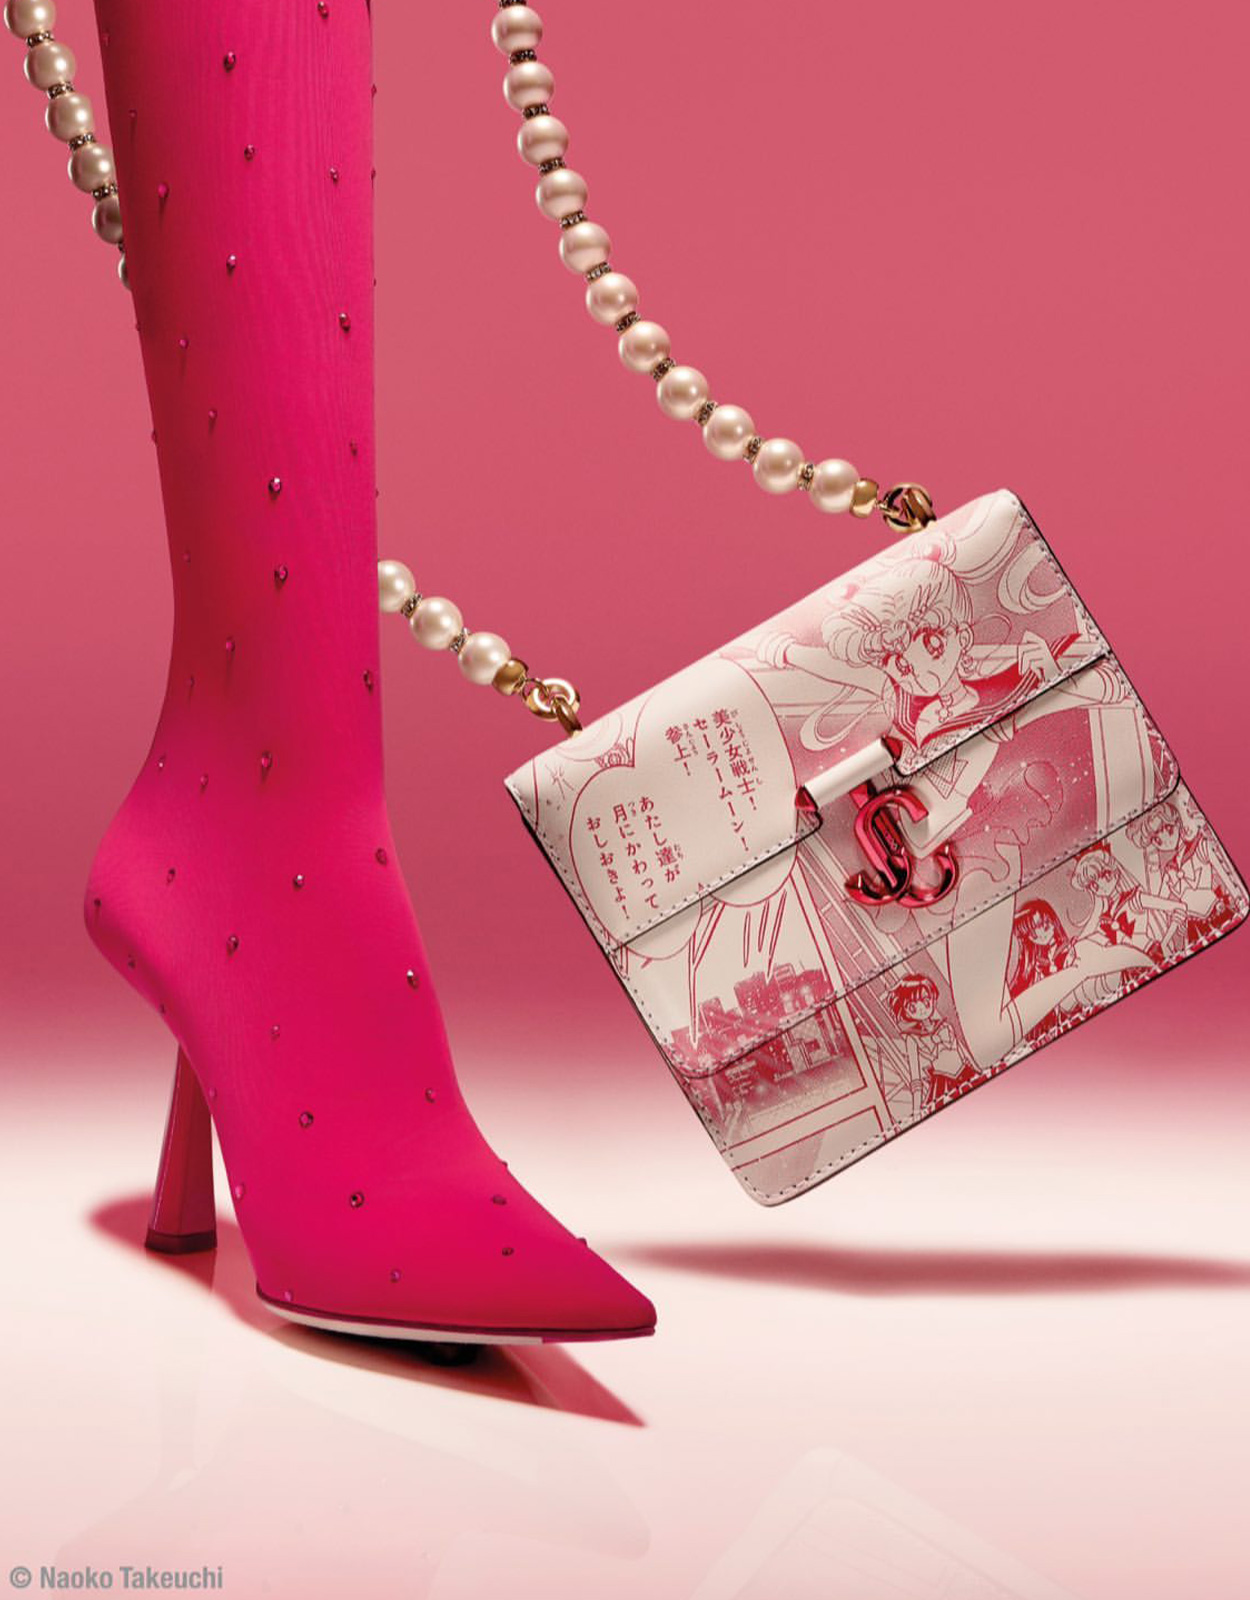 Jimmy Choo's collaboration with Sailor Moon